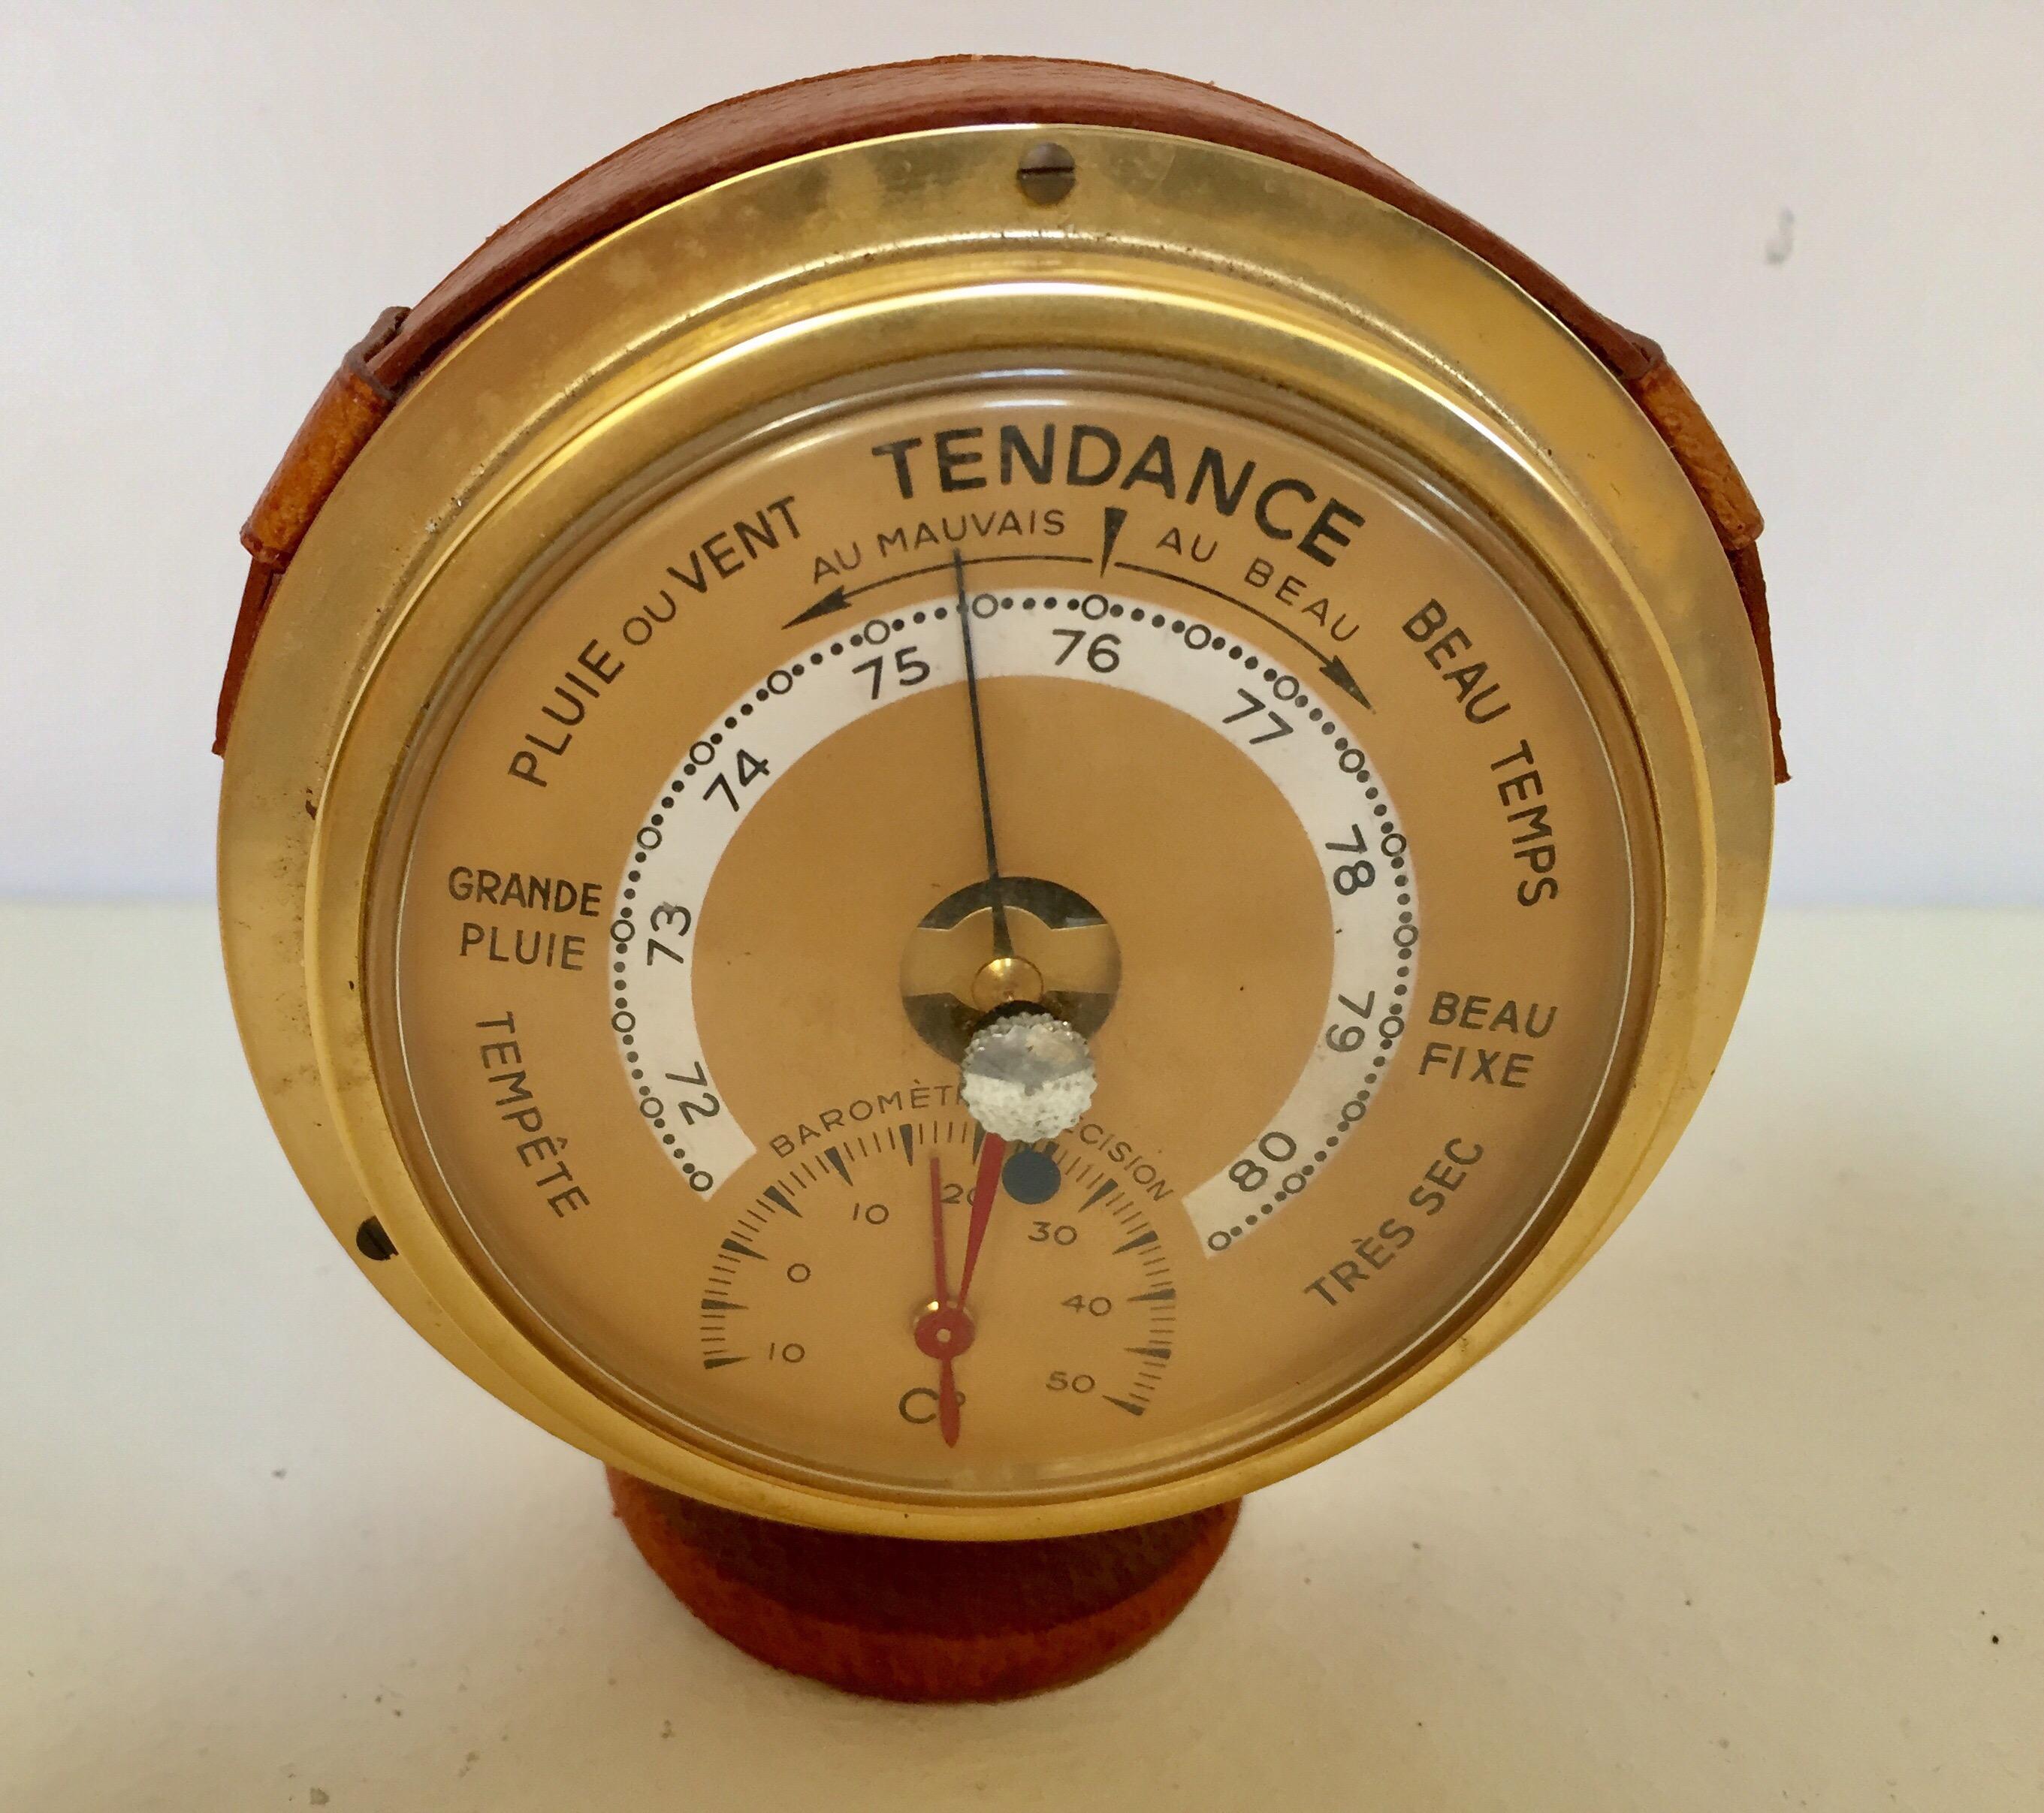 Polished brass French barometer with readings in English.
Wrapped in a brown leather strap.
Great patina on leather in Jacques Adnet style.
Made in France.
Dimensions: 4